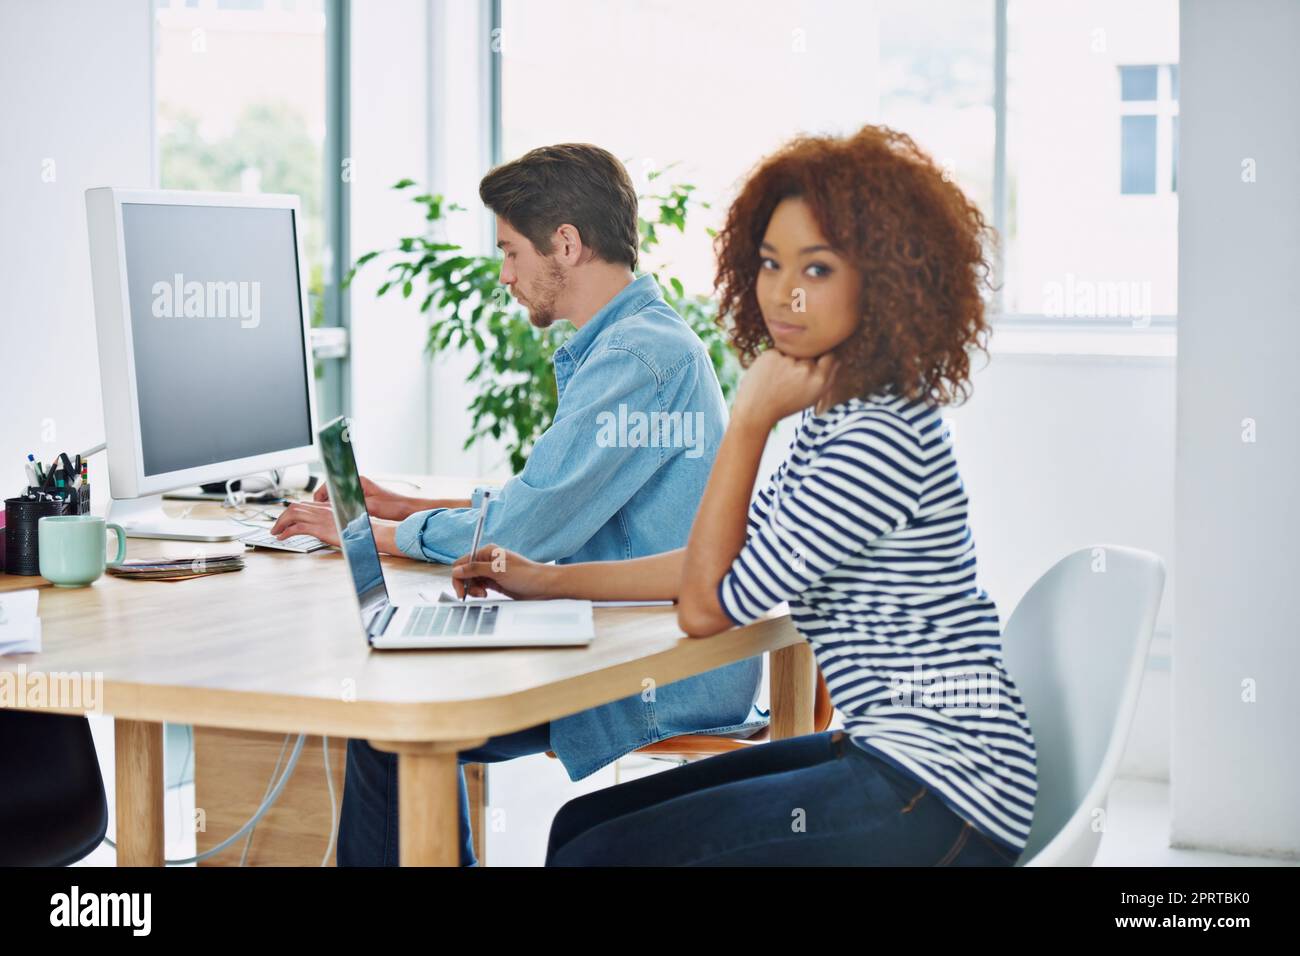 Teamwork makes the dream work. two coworkers working together at their desks. Stock Photo